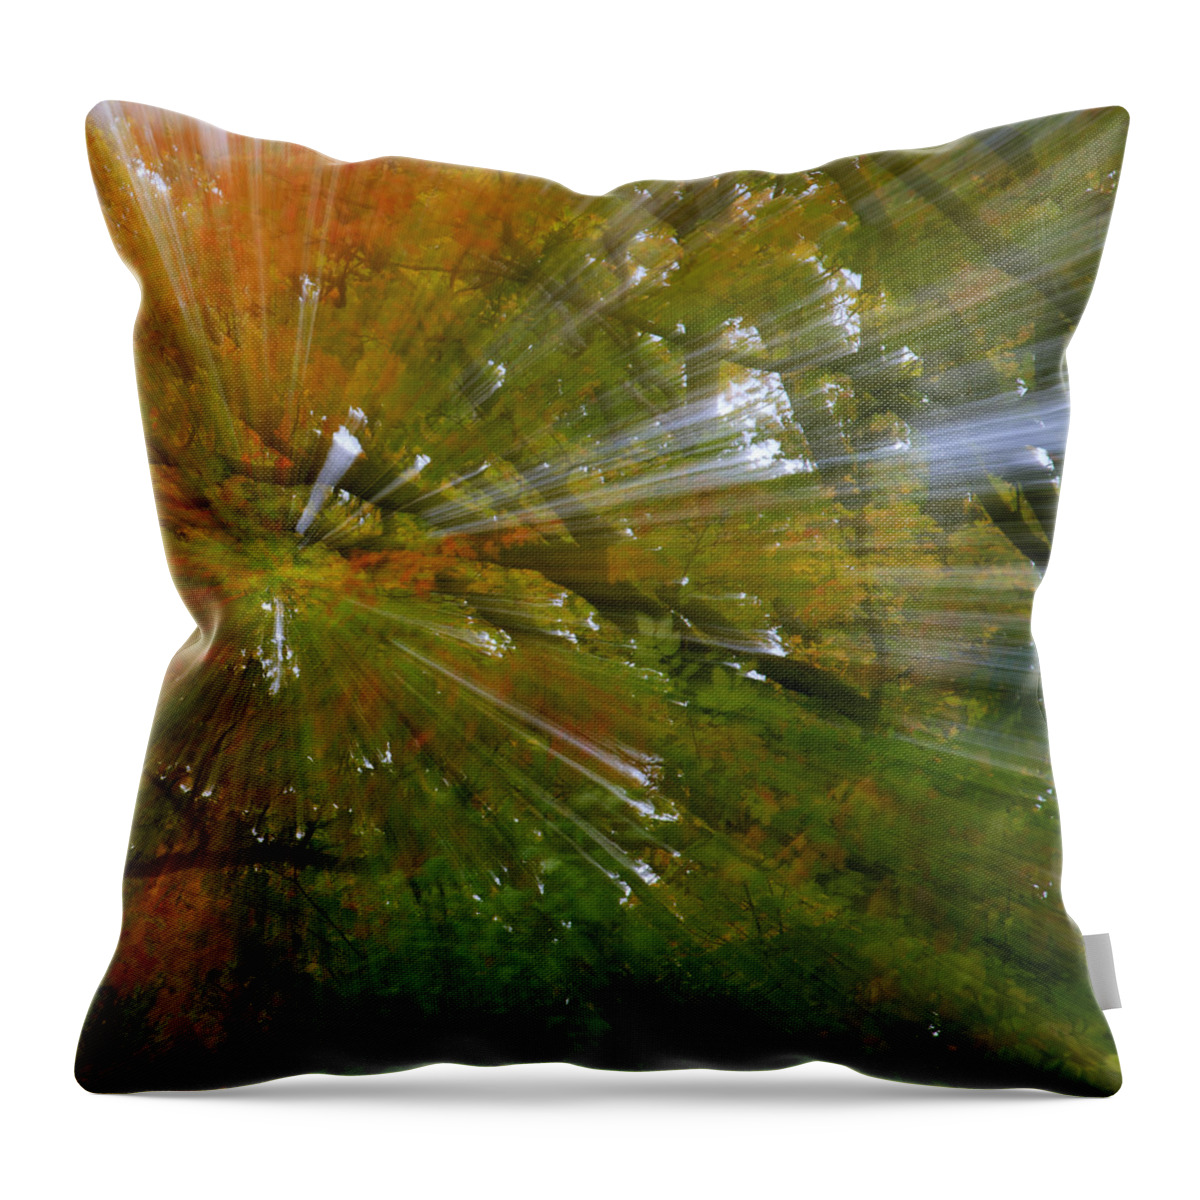 Gary Hall Throw Pillow featuring the photograph Autumn Abstract by Gary Hall